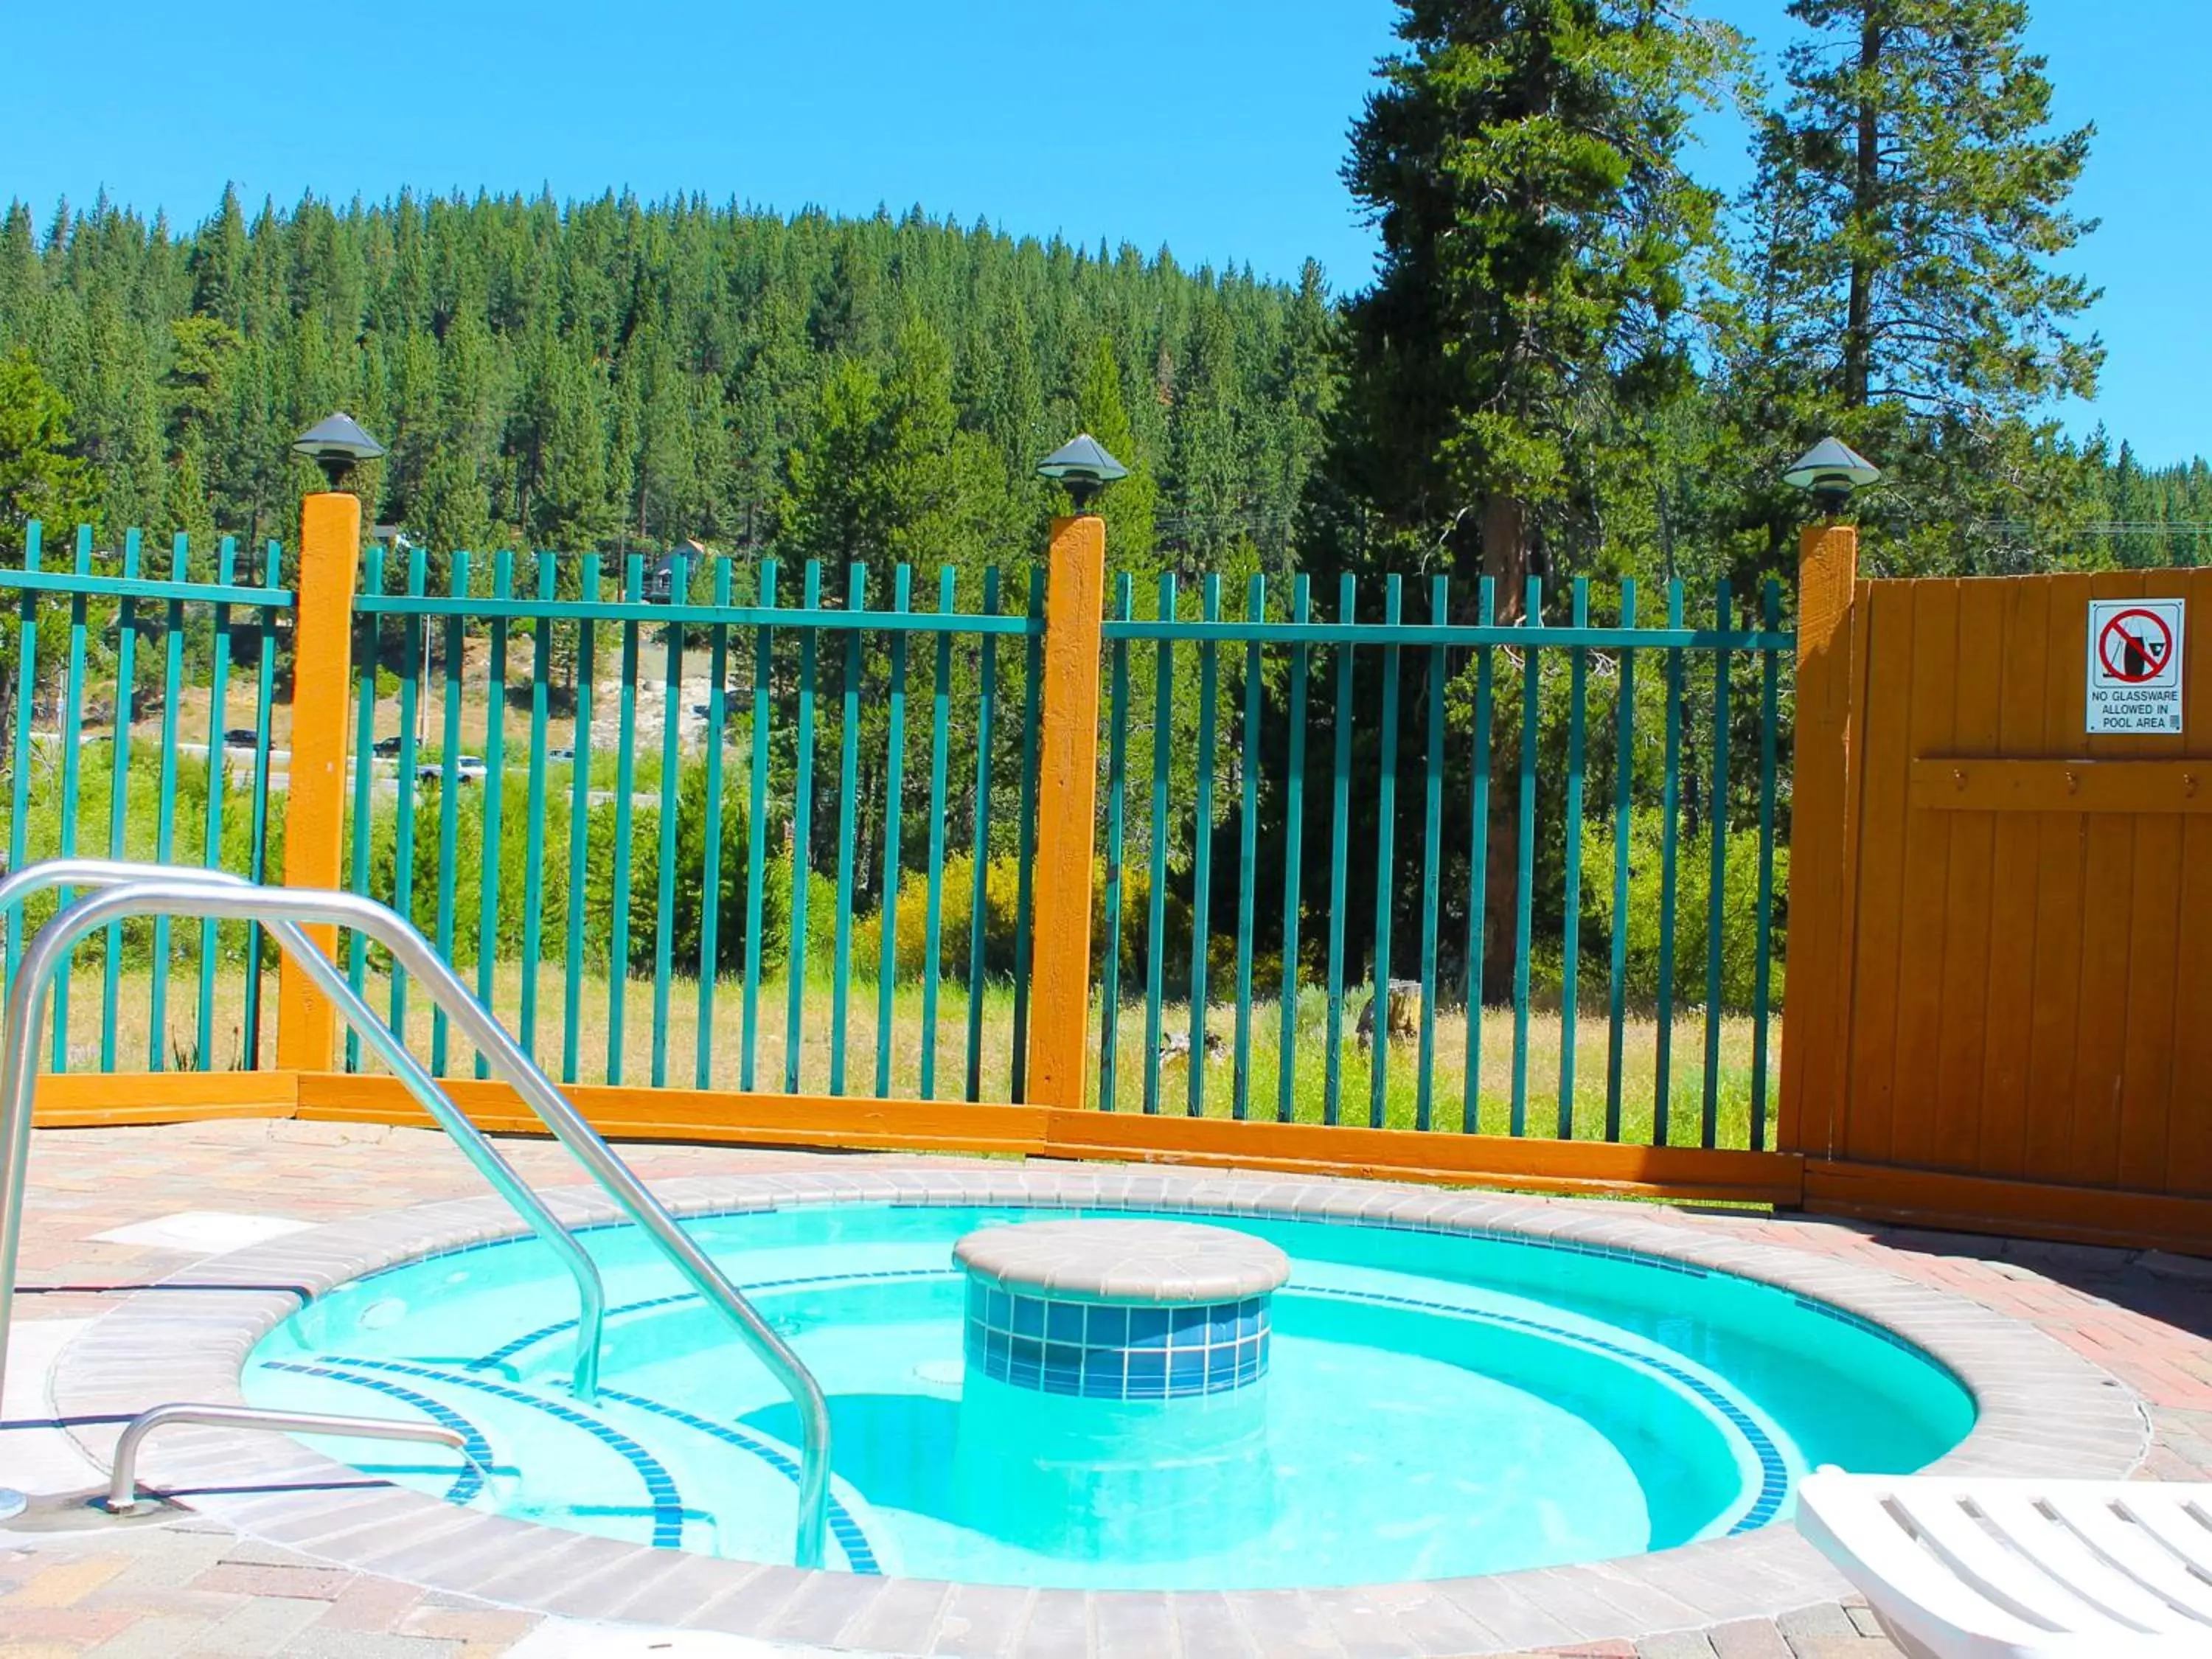 Swimming Pool in Truckee Donner Lodge